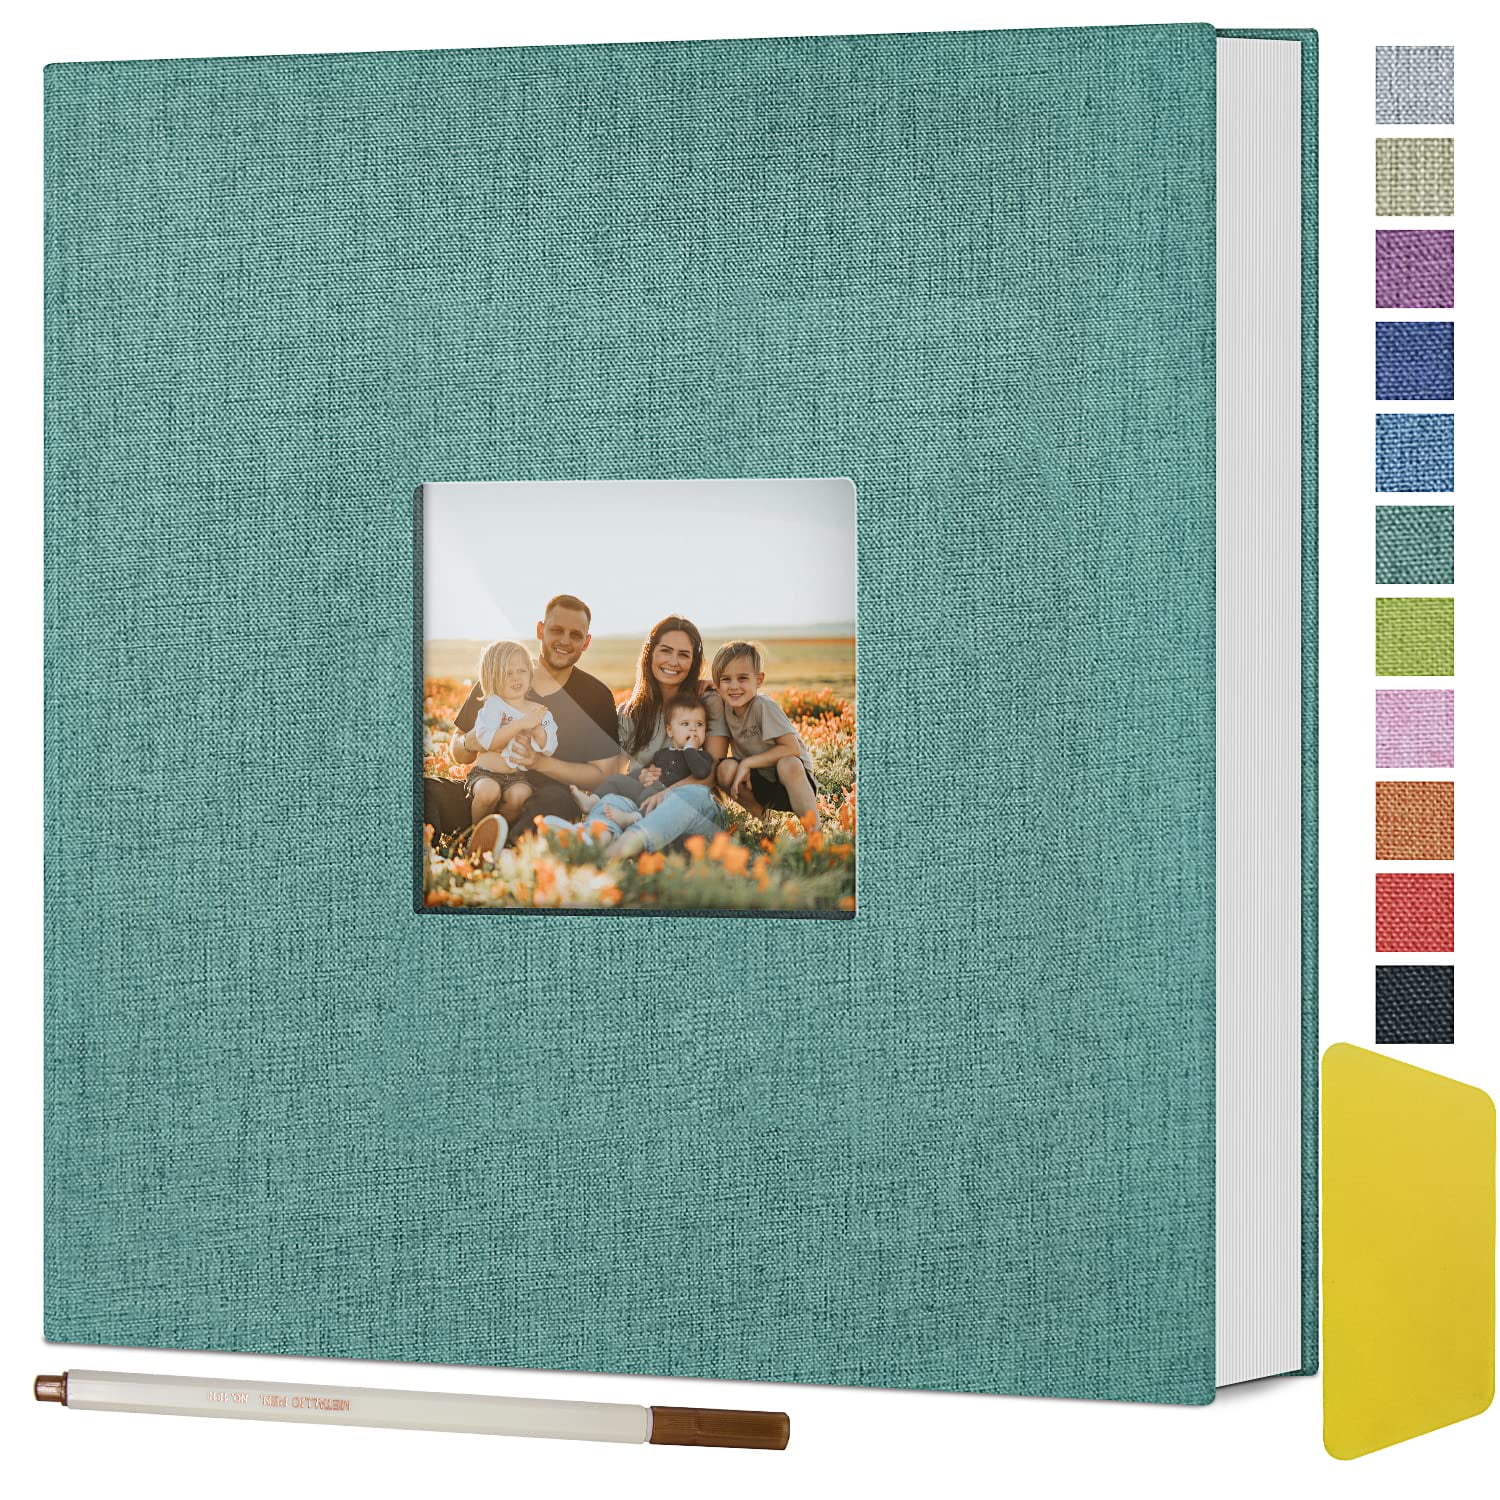 BOBASH 60 Pages Large Photo Album Self Adhesive Photo Album with